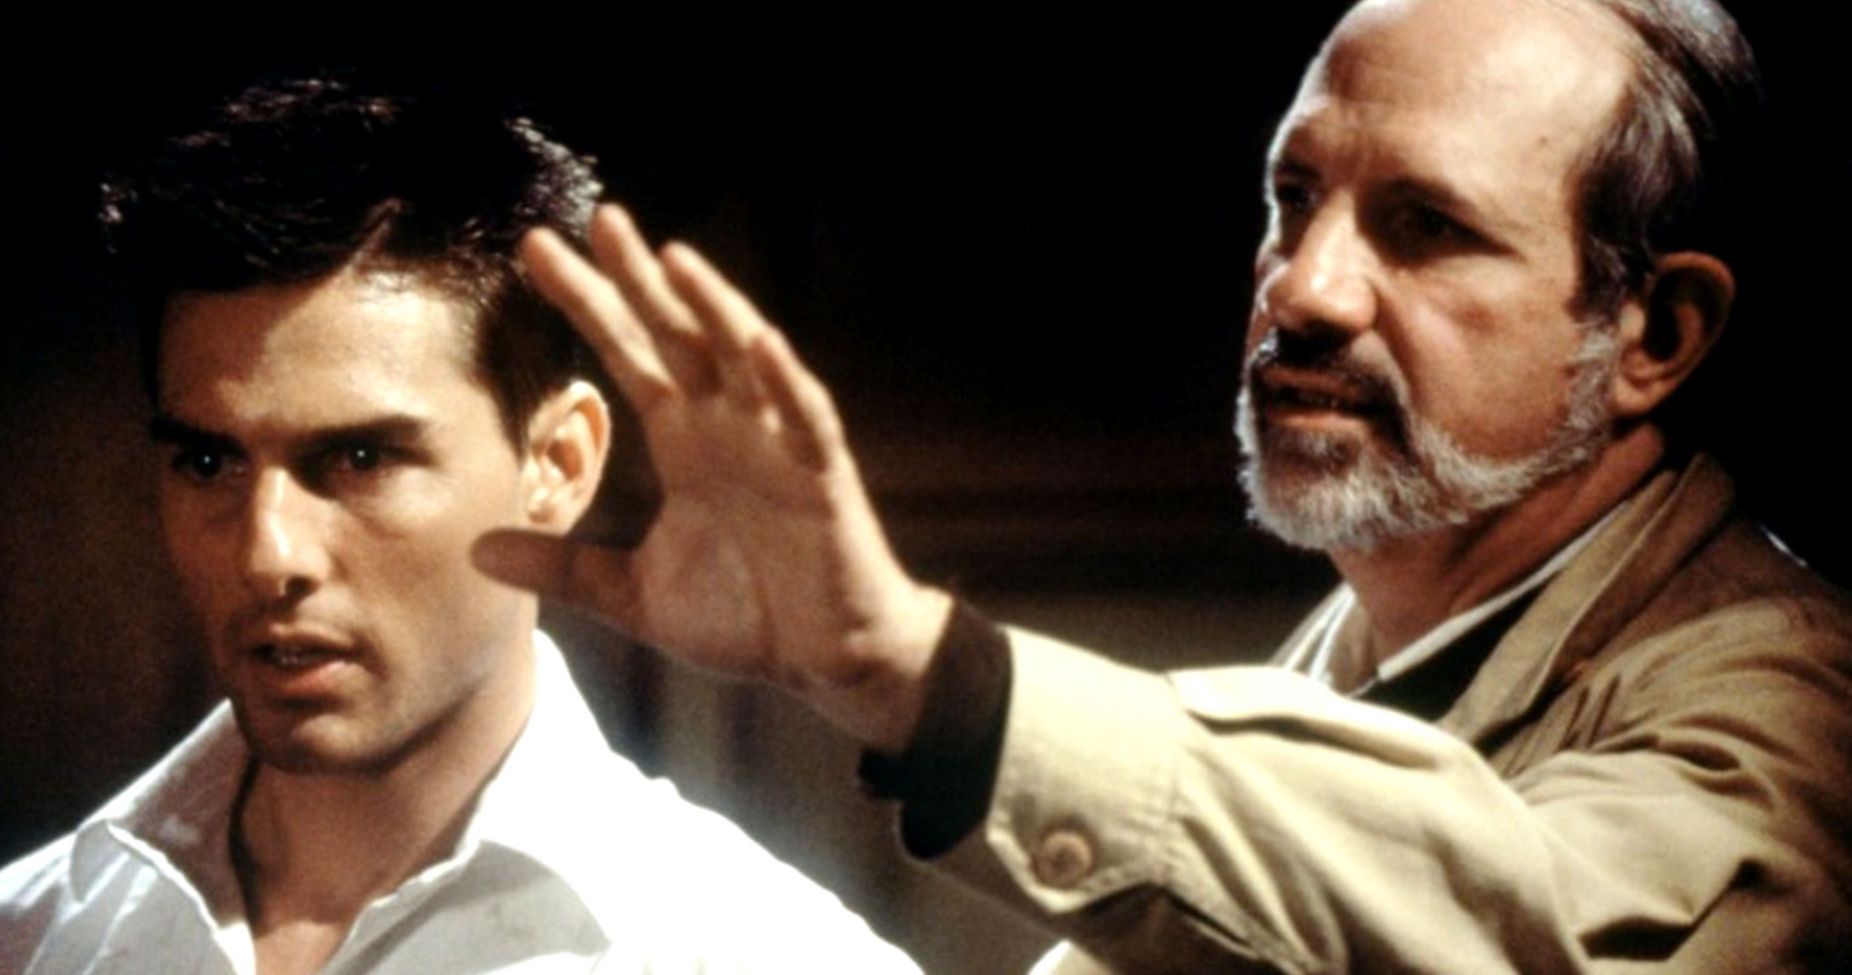 Brian de Palma Isn't Happy with Modern Movies: They All Look The Same